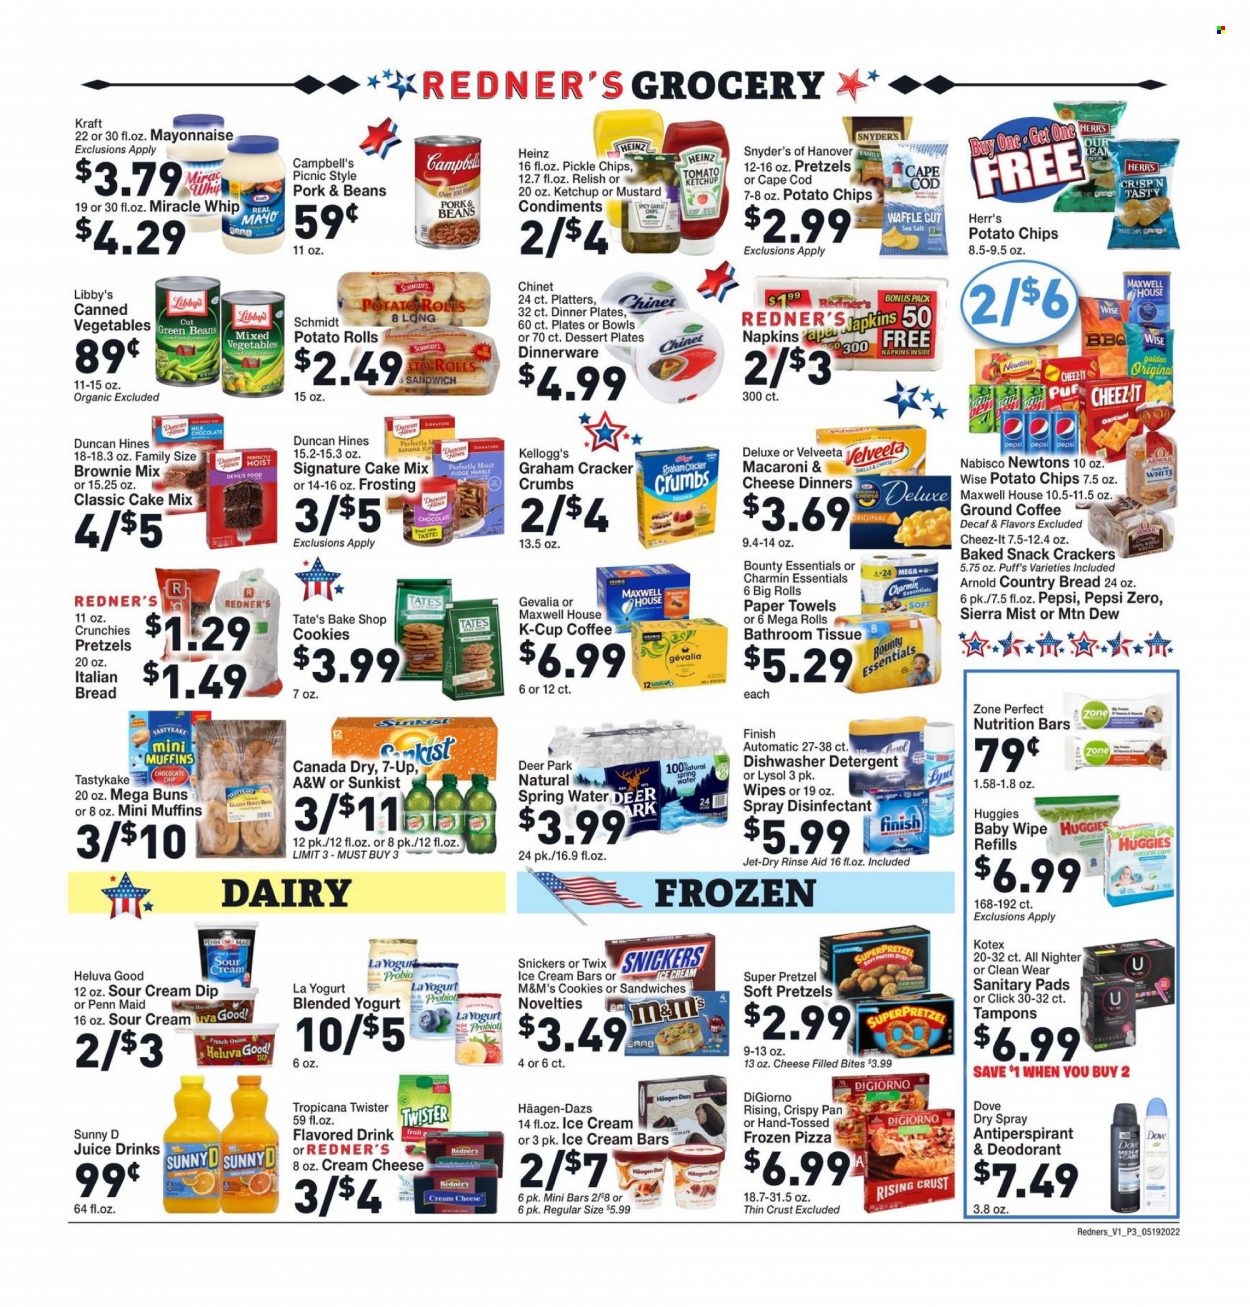 thumbnail - Redner's Markets Flyer - 05/19/2022 - 05/25/2022 - Sales products - bread, pretzels, buns, potato rolls, muffin, brownie mix, cake mix, green beans, onion, cod, Campbell's, macaroni & cheese, pizza, sandwich, Kraft®, cream cheese, yoghurt, milk, sour cream, mayonnaise, Miracle Whip, dip, ice cream, ice cream bars, Häagen-Dazs, mixed vegetables, cookies, fudge, snack, Snickers, Twix, Bounty, M&M's, crackers, Kellogg's, potato chips, Cheez-It, frosting, Heinz, canned vegetables, nutrition bar, Zone Perfect, mustard, ketchup, Canada Dry, Mountain Dew, Pepsi, juice, 7UP, A&W, Sierra Mist, Tropicana Twister, spring water, Maxwell House, coffee, ground coffee, coffee capsules, K-Cups, Gevalia, wipes, Huggies, napkins, bath tissue, kitchen towels, paper towels, Charmin, detergent, desinfection, Lysol, Jet, Dove, sanitary pads, Kotex, tampons, dinnerware set, plate, pan, dessert plate, dinner plate. Page 5.